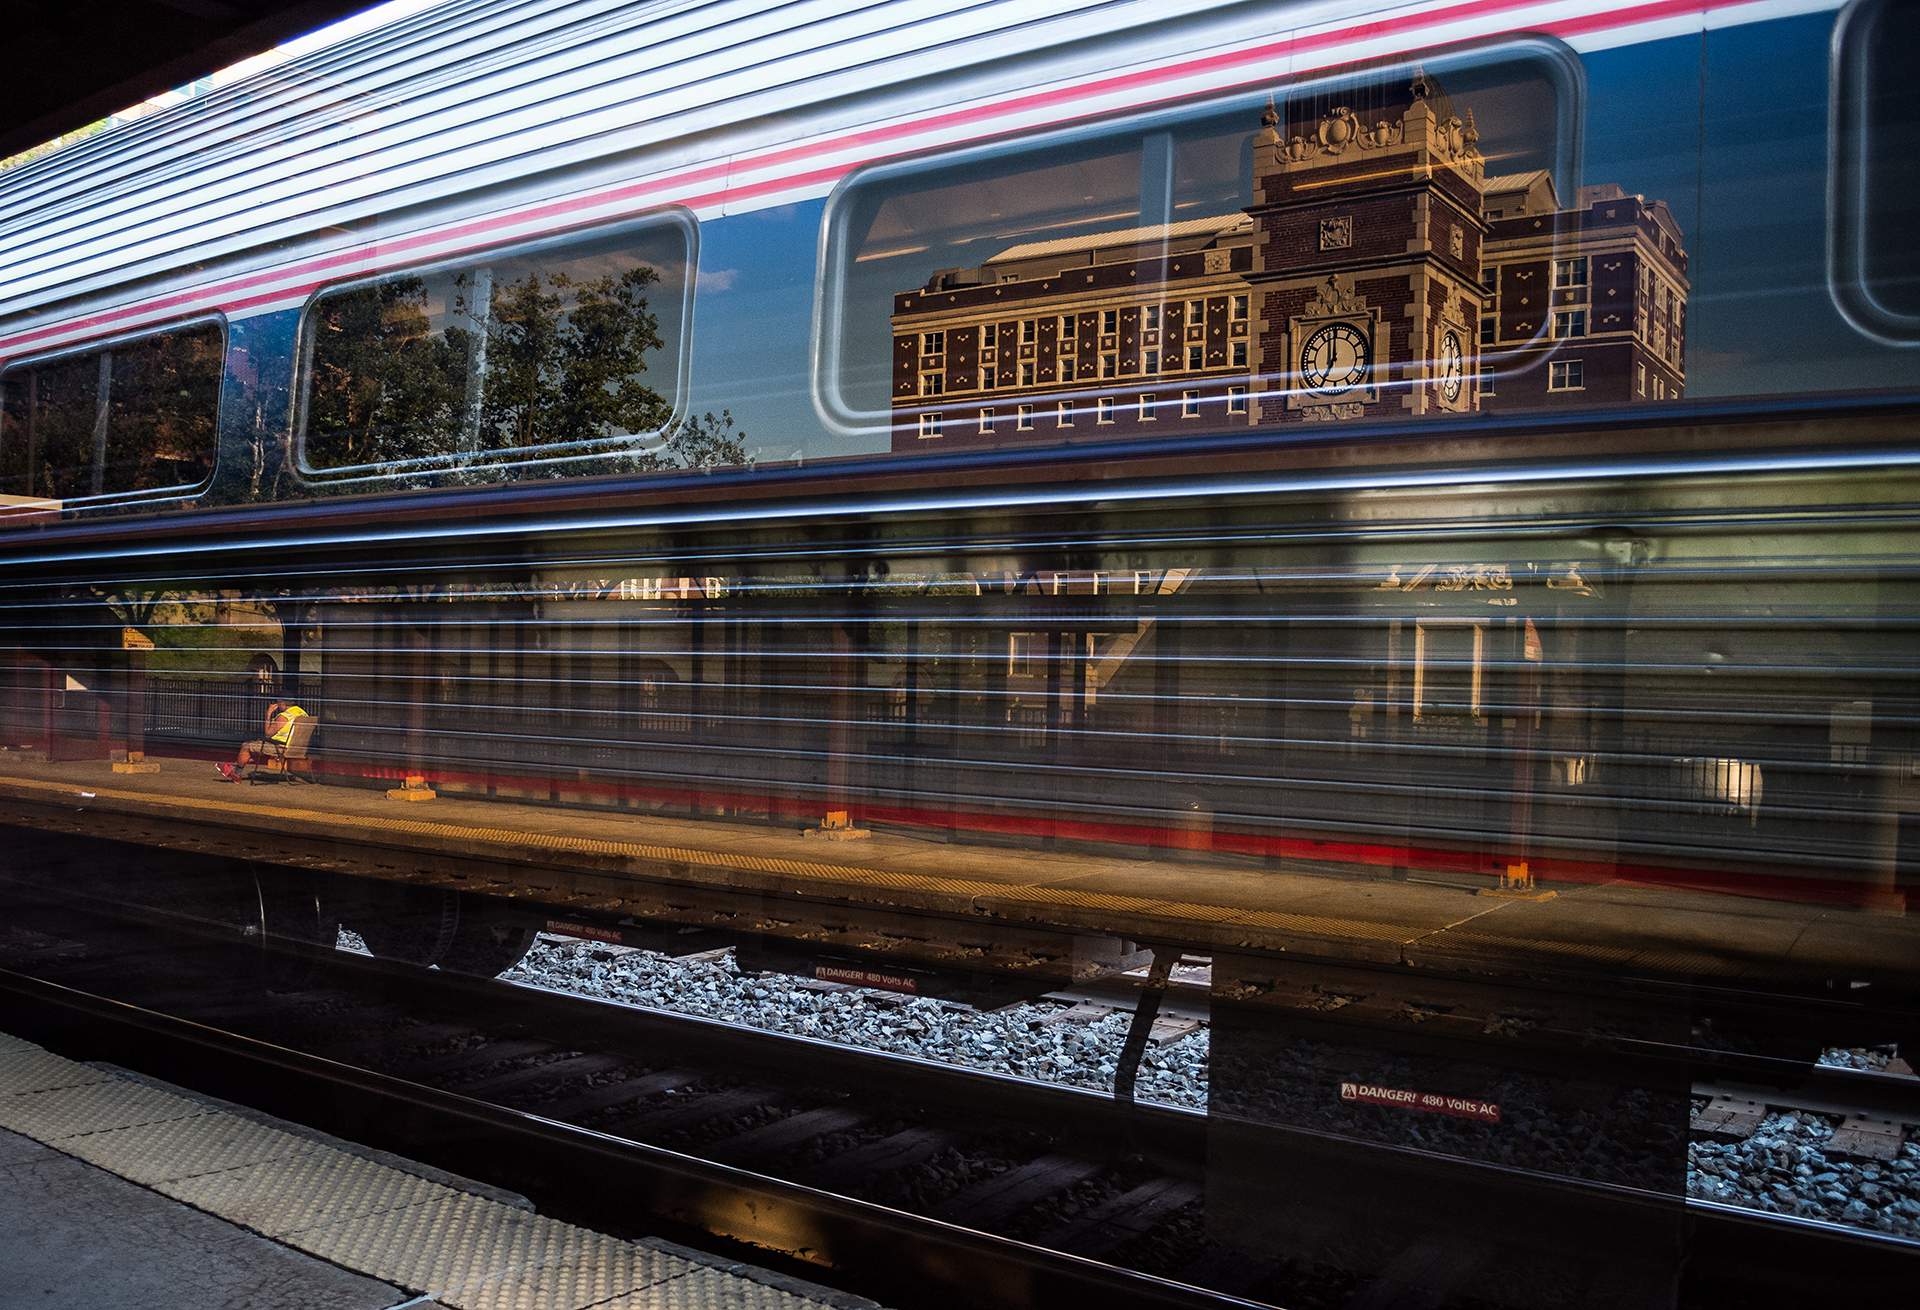 First place photo for Trains magazine. Reflections in passing train